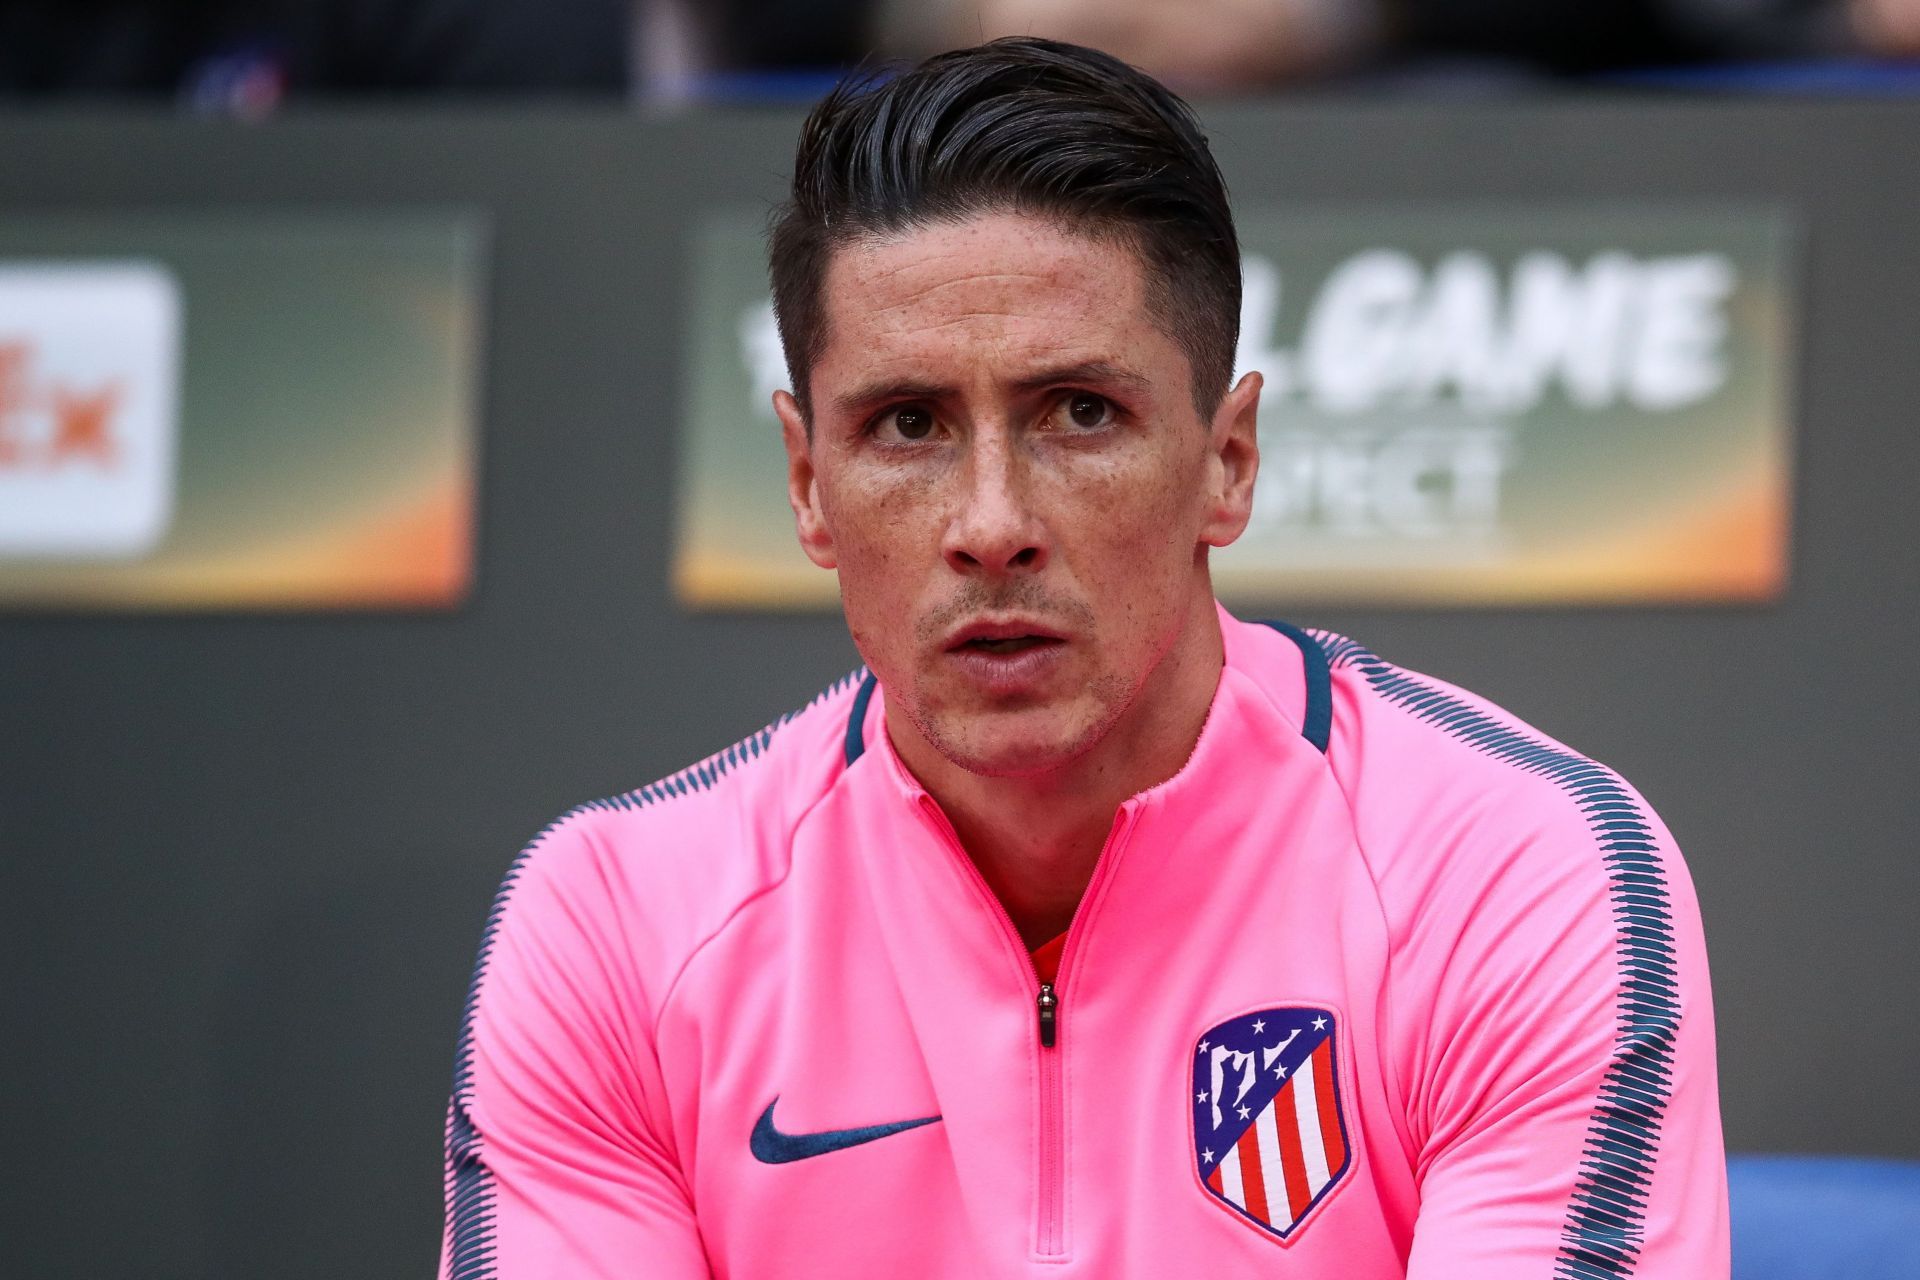 Former Liverpool forward Fernando Torres. (Photo by Maja Hitij/Getty Images)